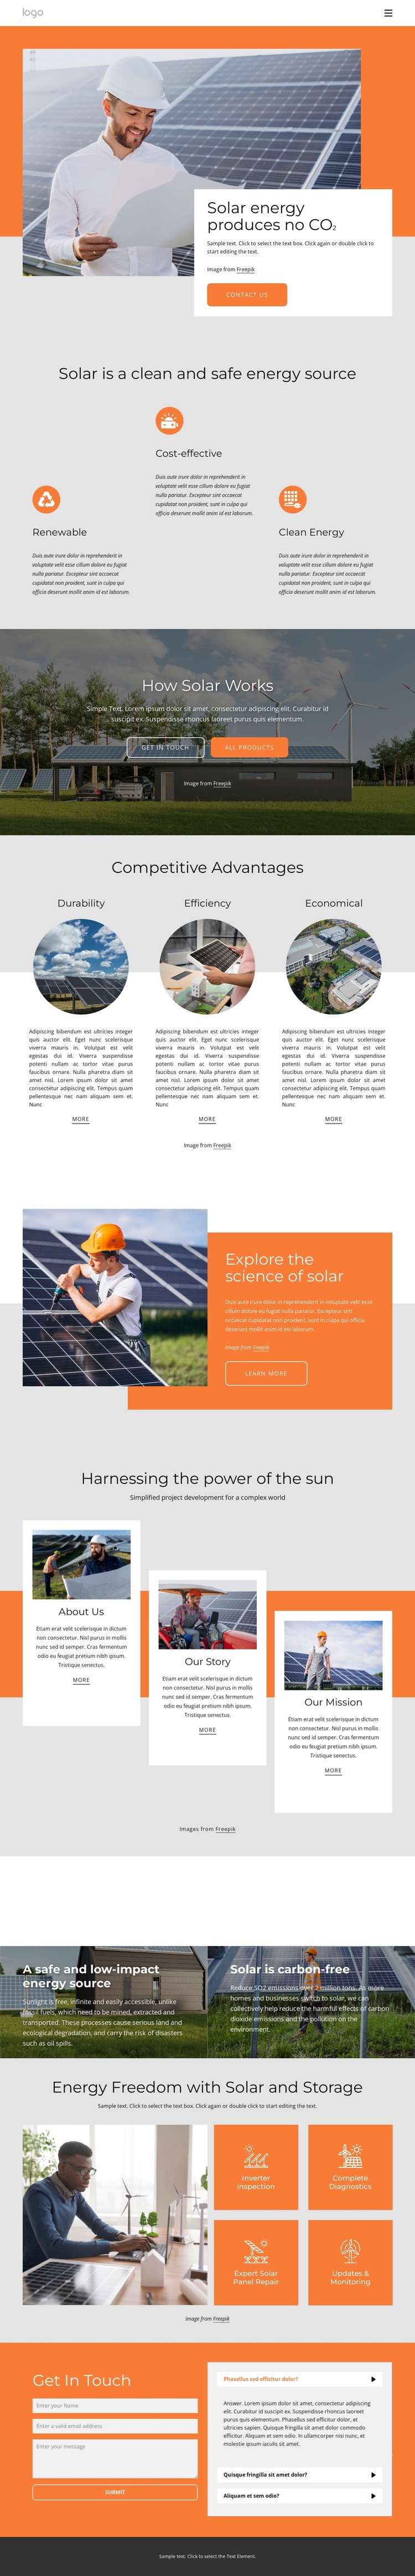 Power your home with clean solar energy Website Design